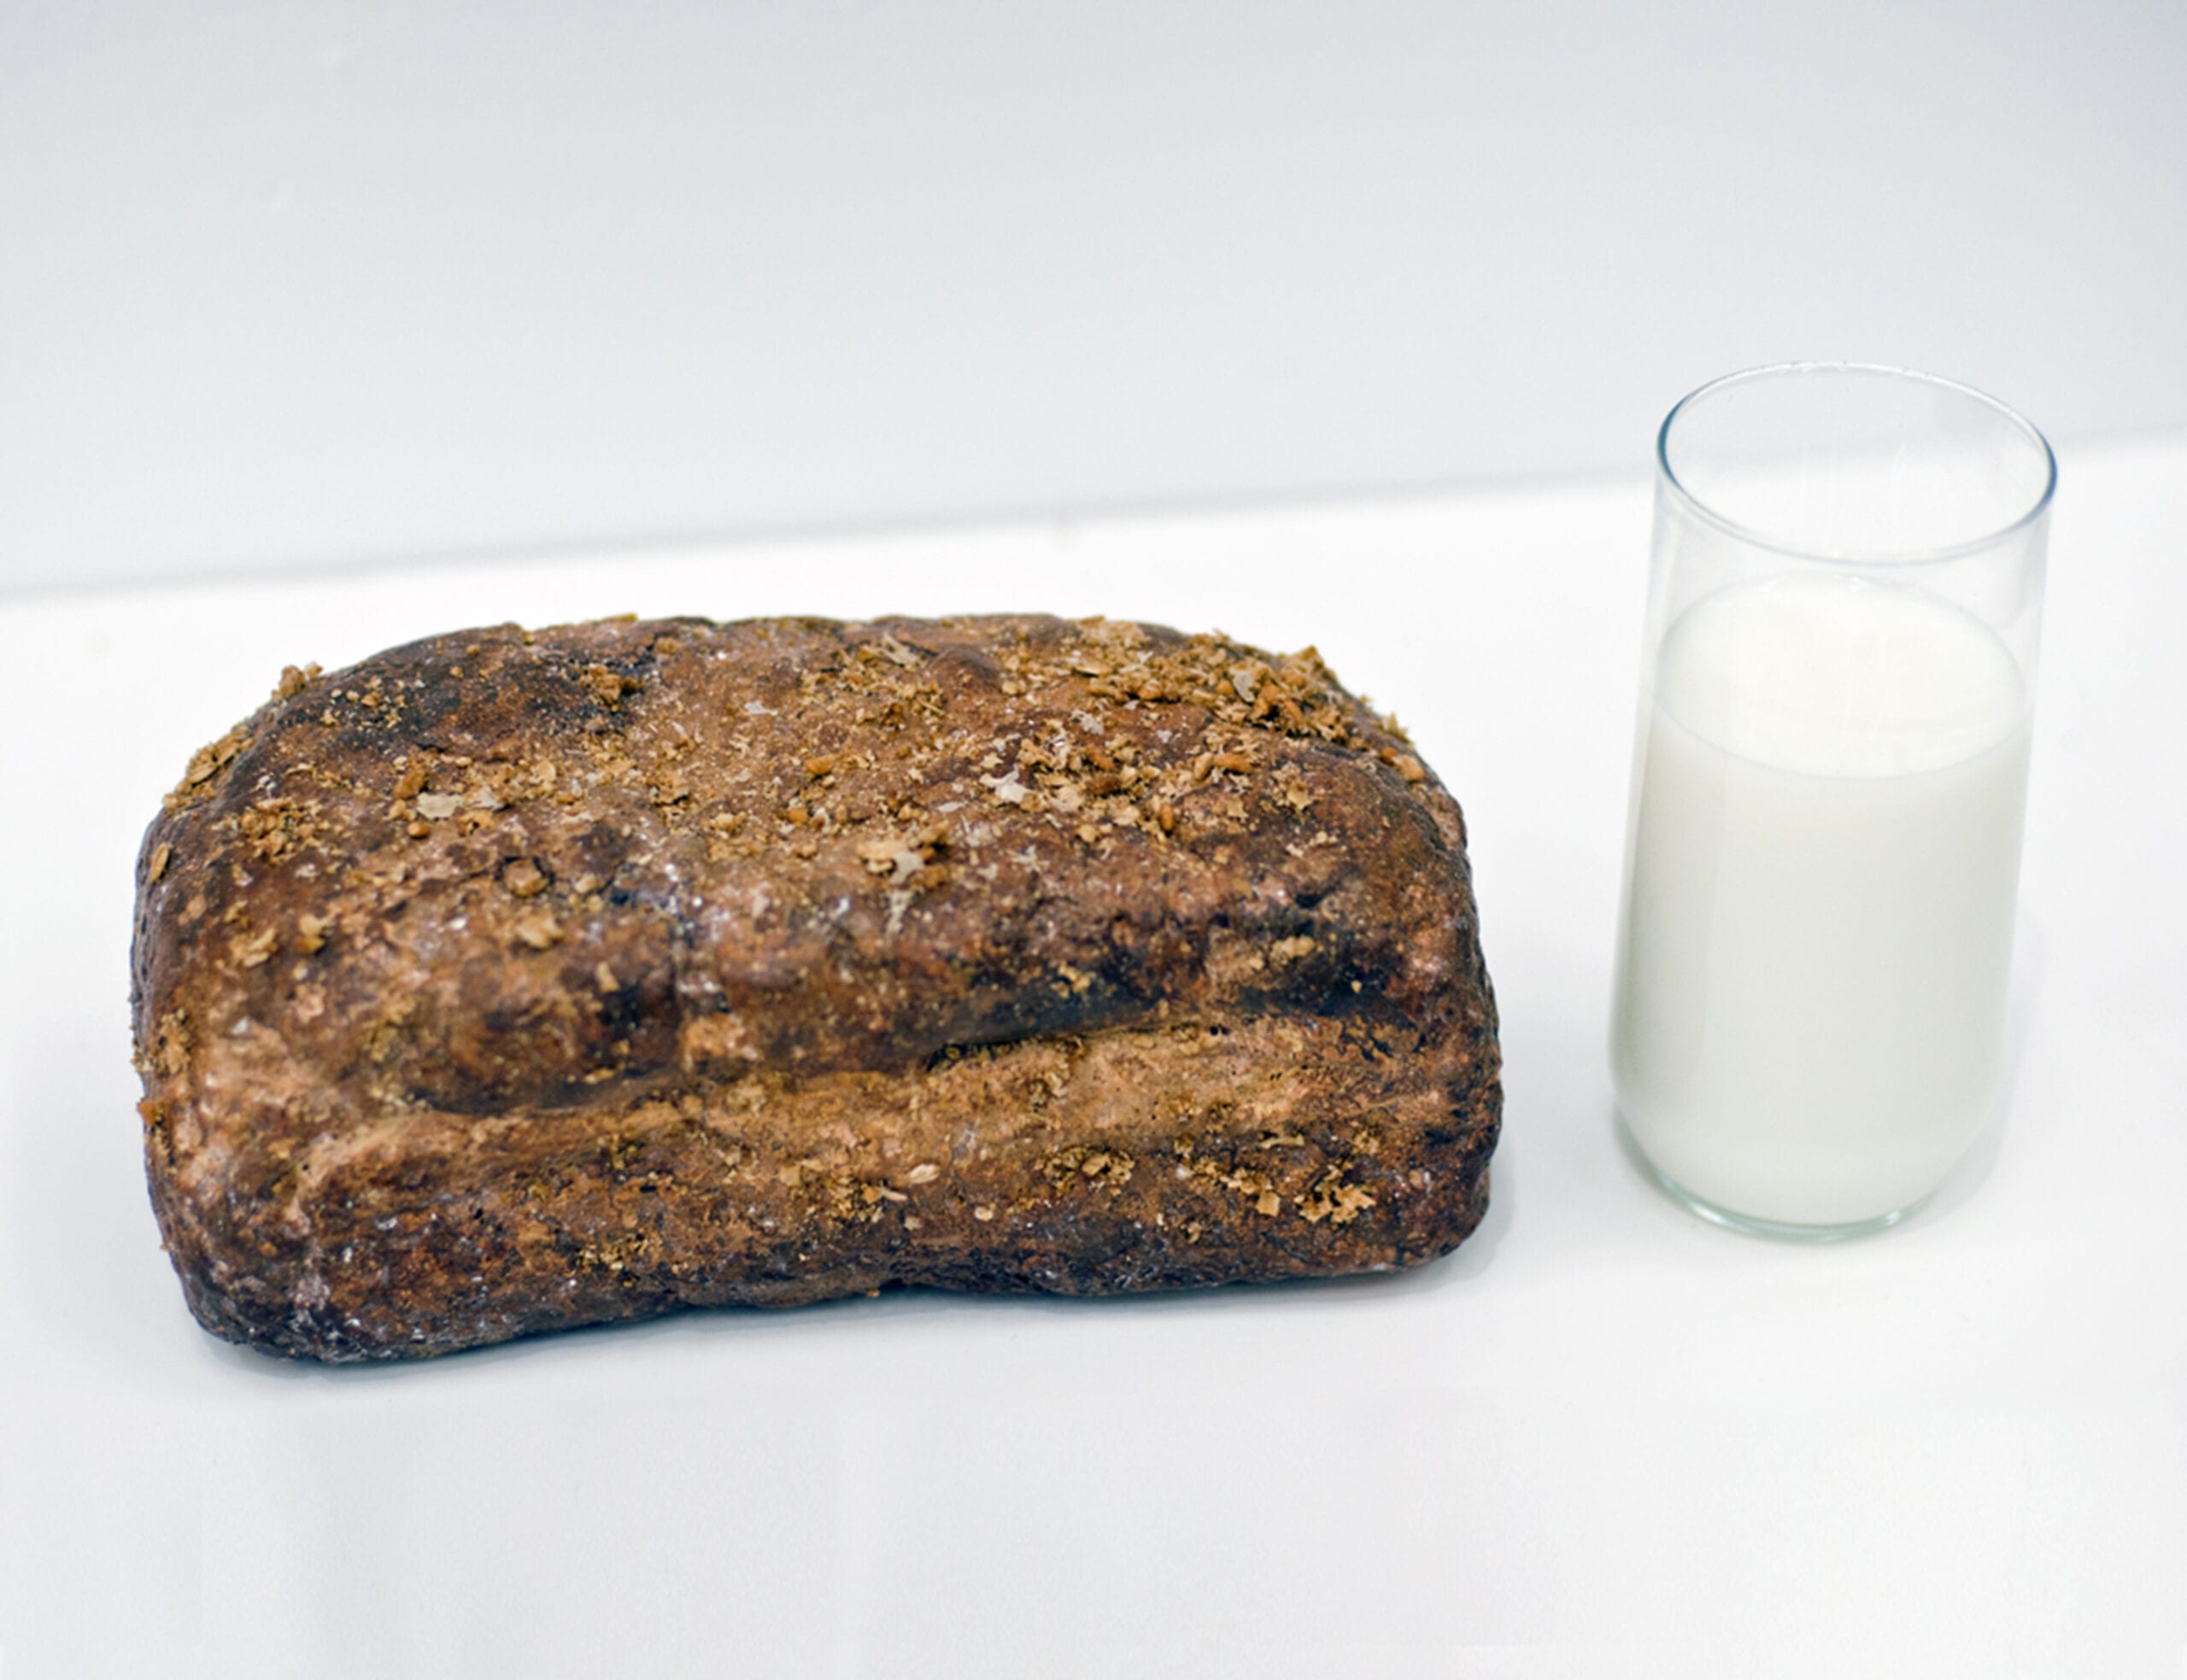 Jason Guo, An Elementary Meal; Still Life with Bread and Milk, Aluminum and acrylic, 24 x 11 x 9 cm, 2011